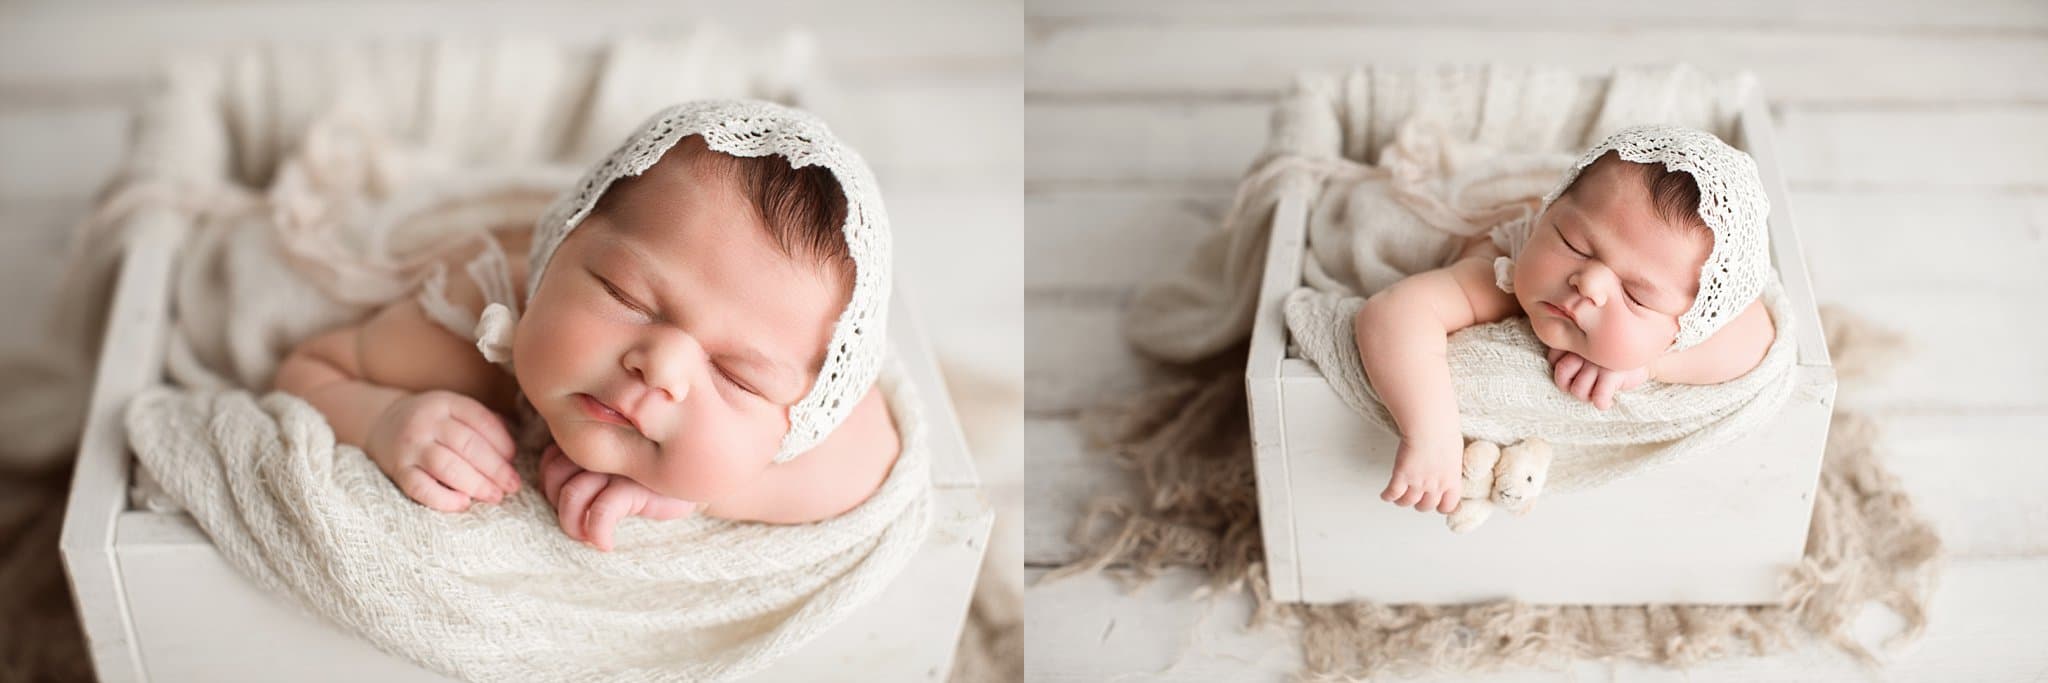 chubby cheek baby girl all white background lace bonnet New Baby Photos In Jacksonville